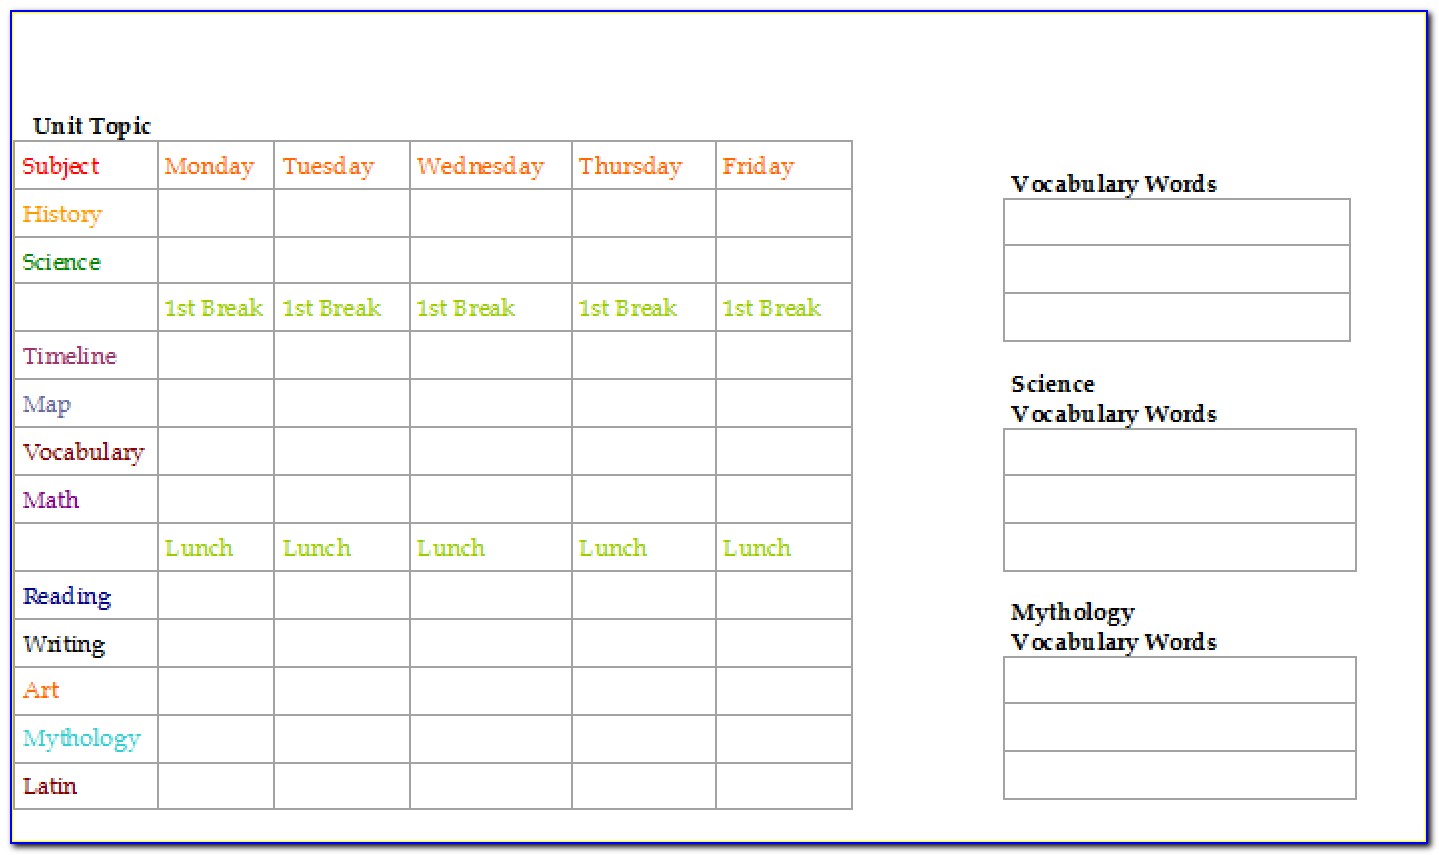 Daily Schedule Grid Template